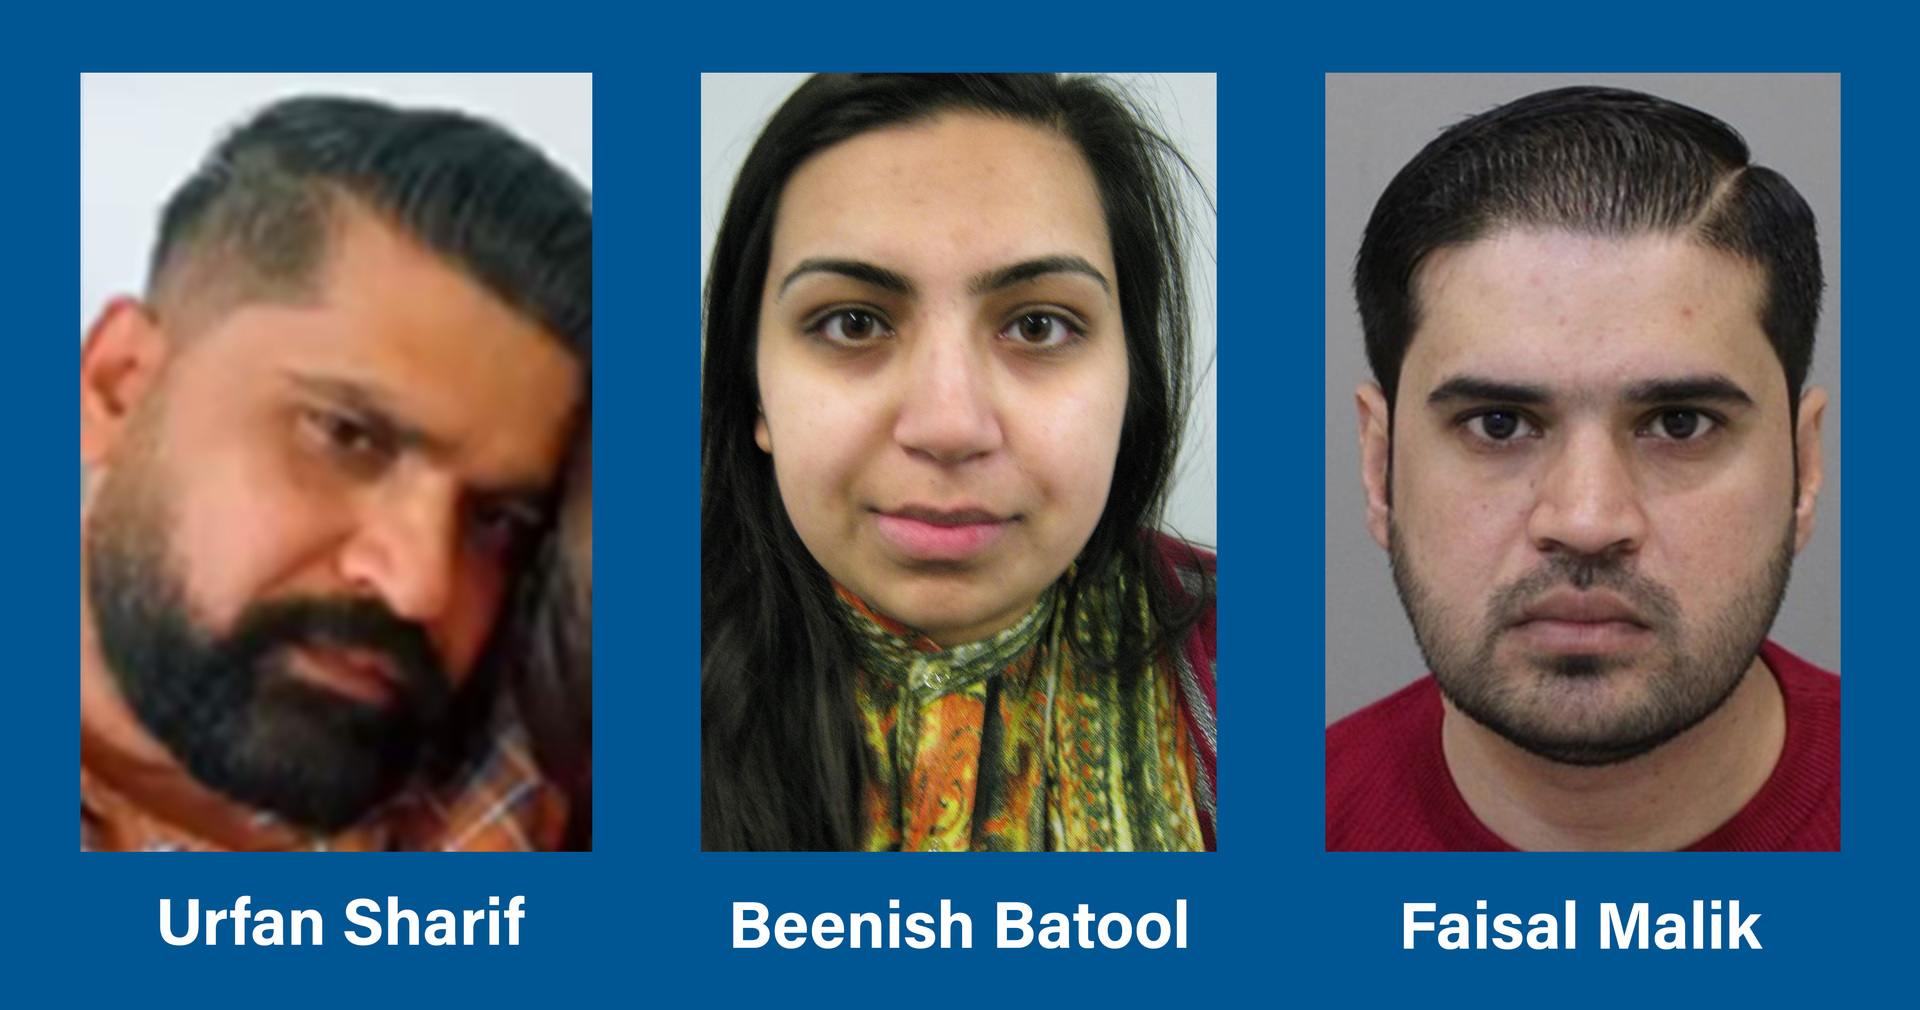 Police are looking for Sara’s father, Urfan Sharif, 41, his partner Beinash Batool, 29, and Urfan’s brother, Faisal Malik, 28. 